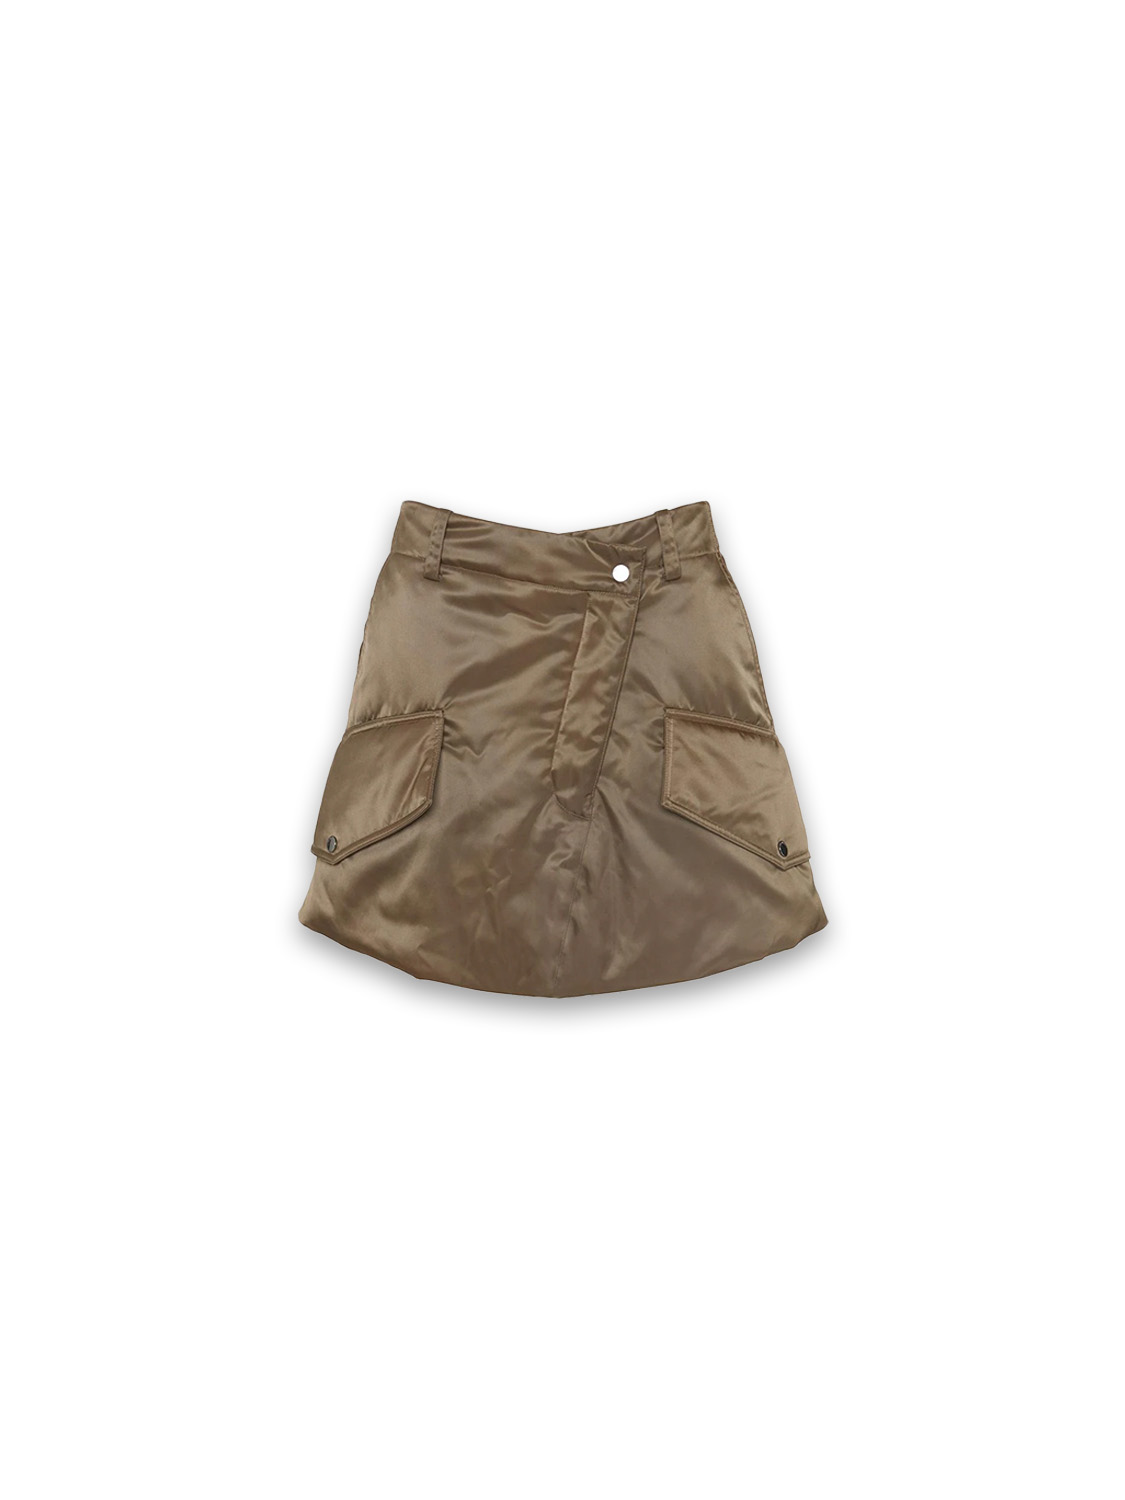 JW Anderson Padded - Padded mini skirt in cargo style beige 36